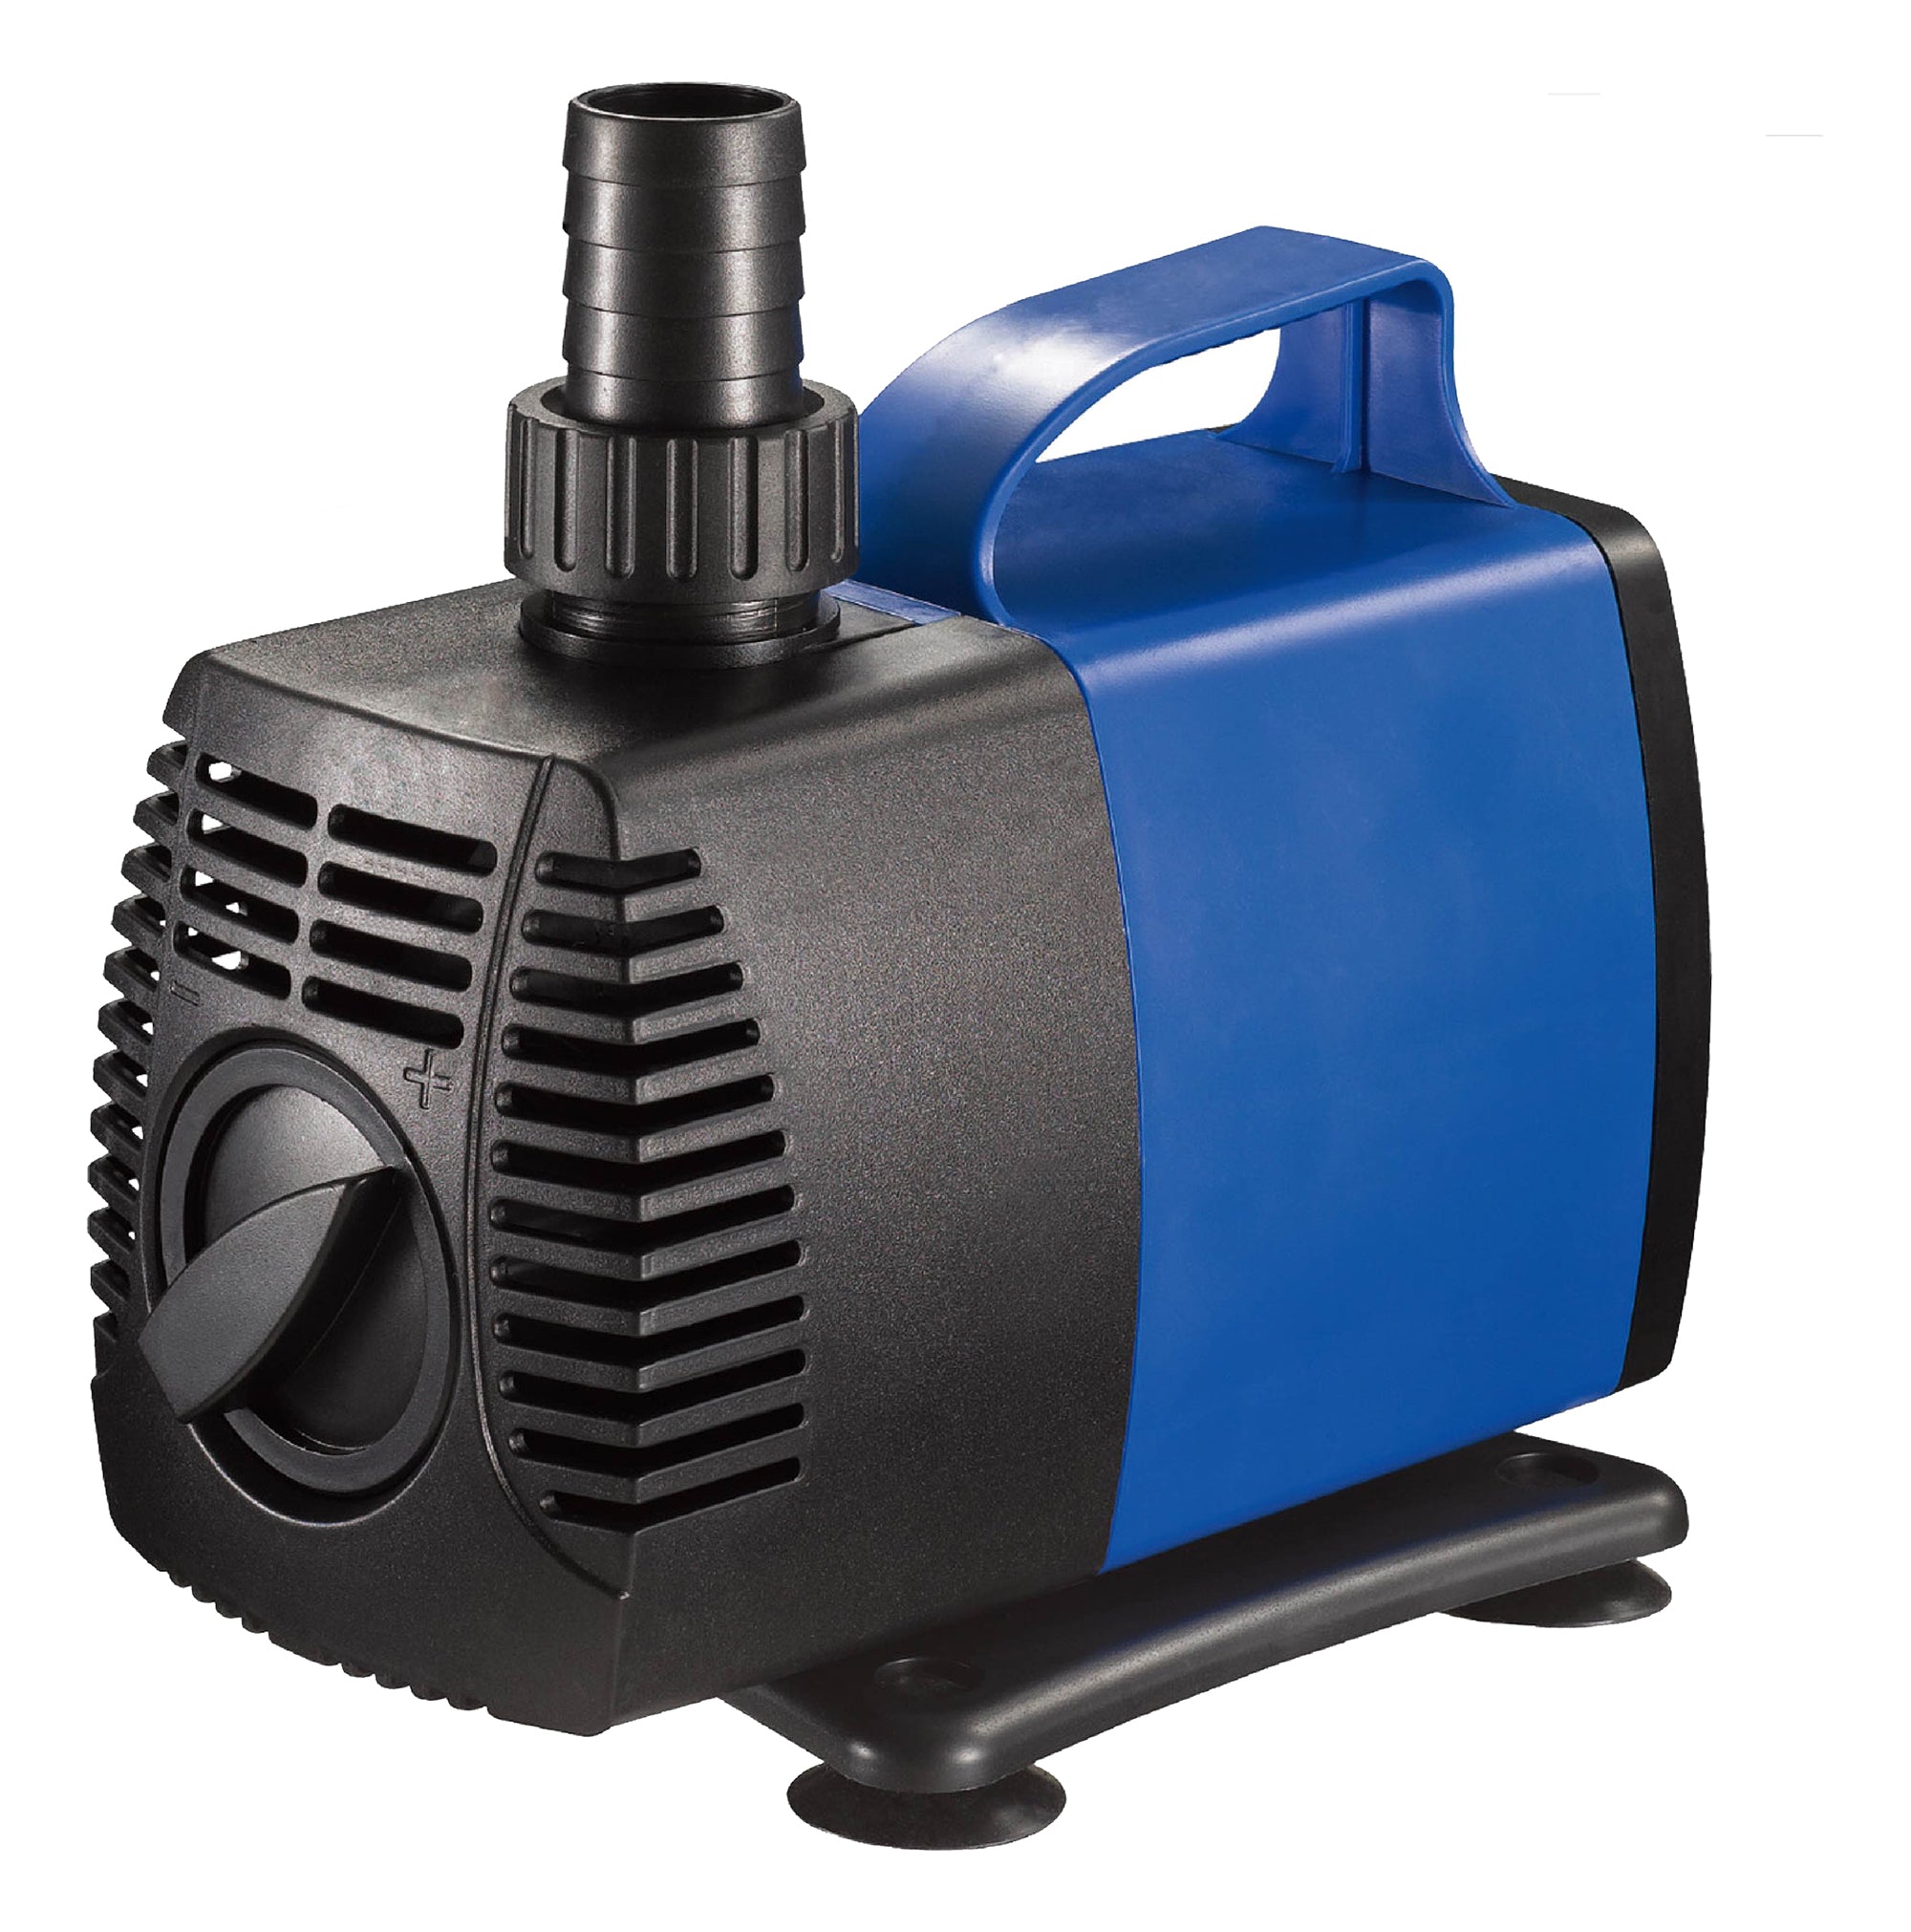 WHAT IS A SUBMERSIBLE PUMP?  HOW DOES A SUBMERSIBLE WATER PUMP